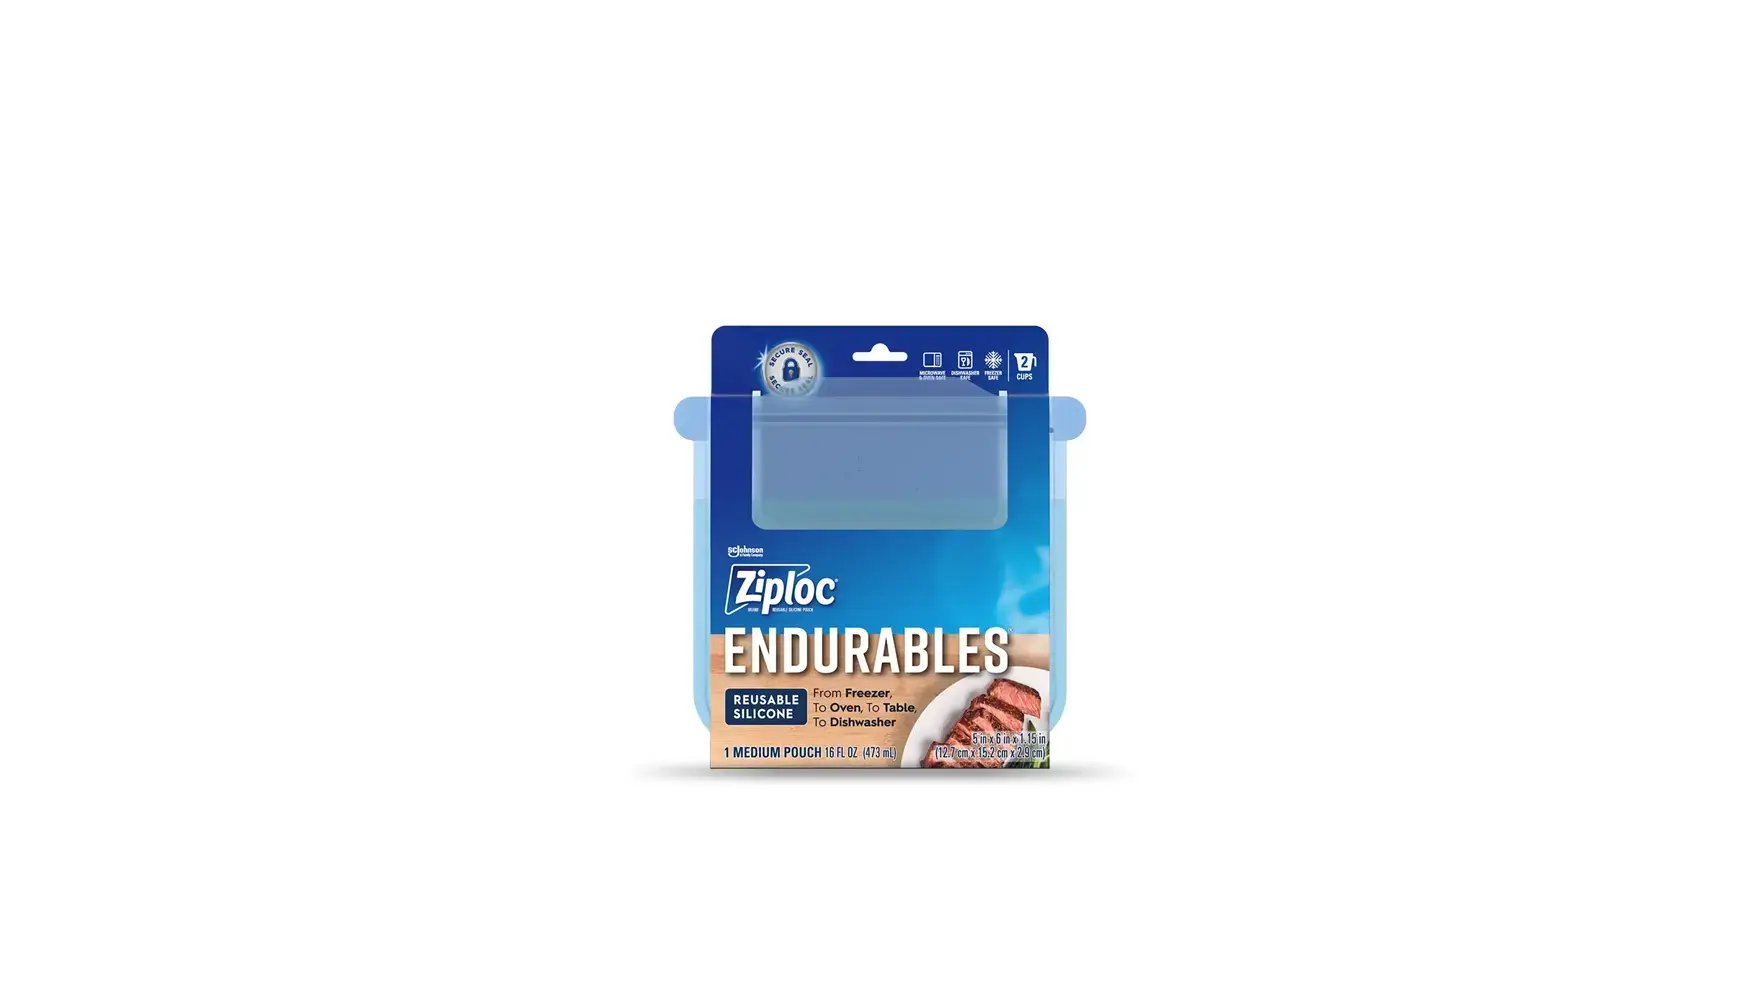  Ziploc Endurables Large Pouch, 8 Cups, Reusable Silicone Bags  and Food Storage Meal Prep Containers for Freezer, Oven, and Microwave,  Dishwasher Safe : Health & Household